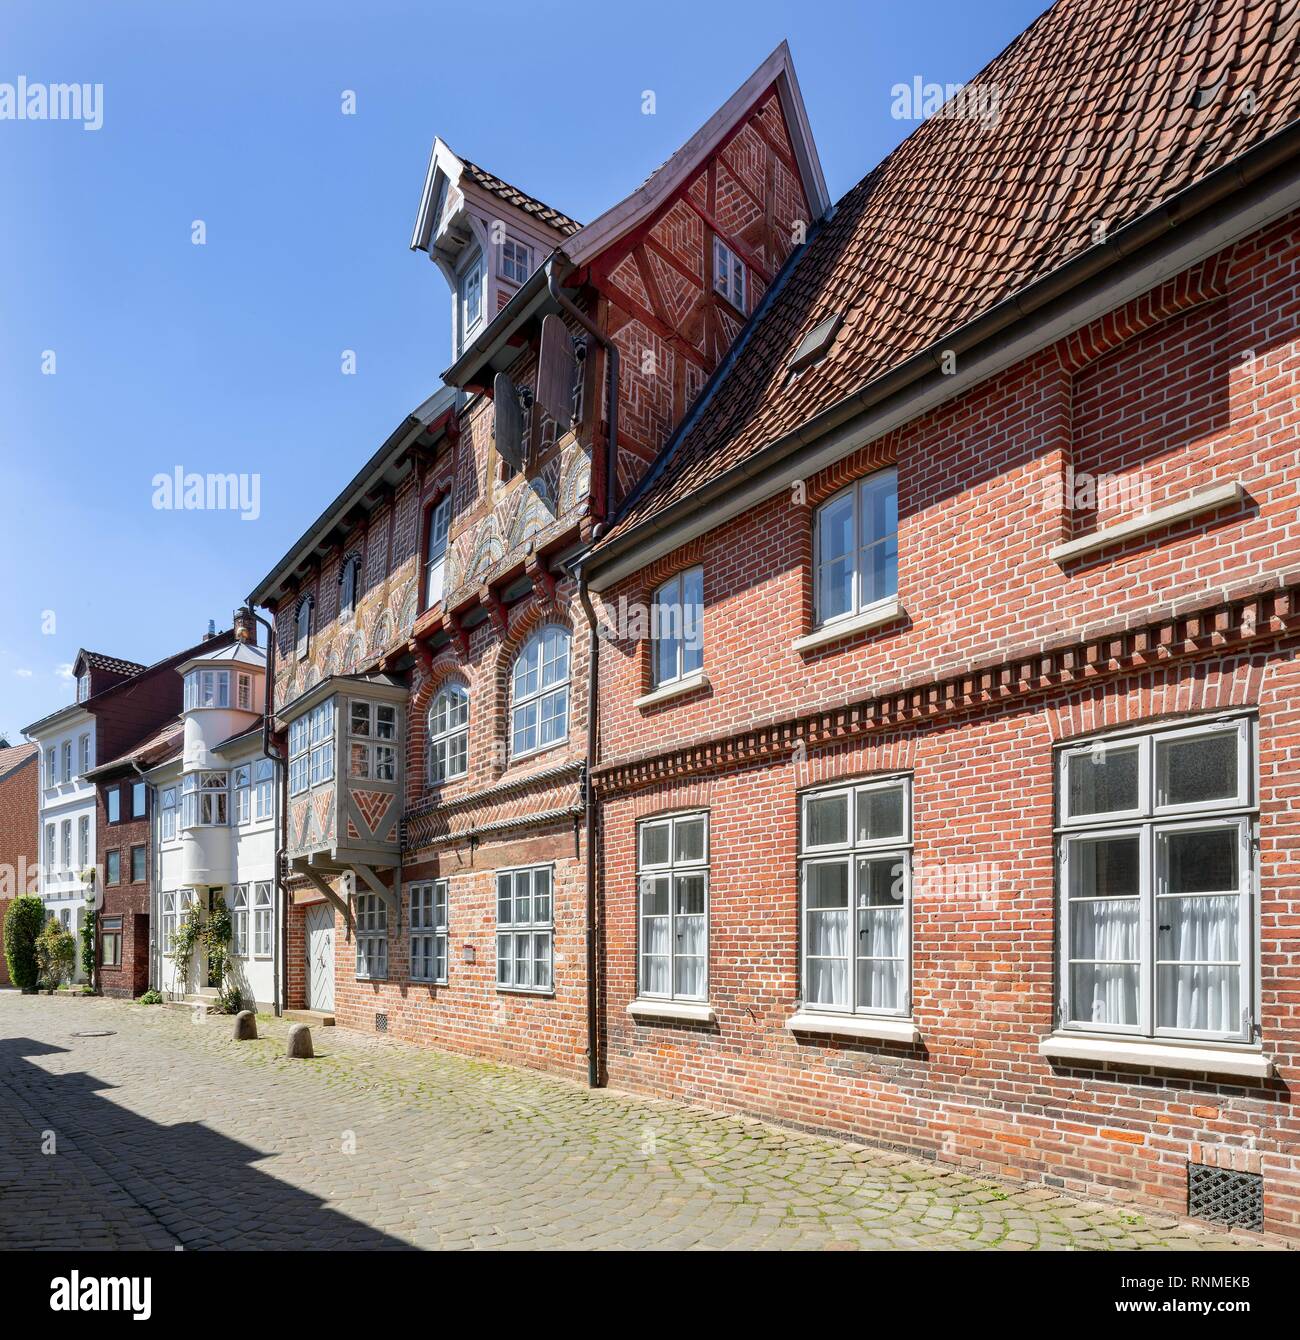 Street train with historic town houses, Obere Ohlingerstraße, Old Town, Lüneburg, Lower Saxony, Germany Stock Photo